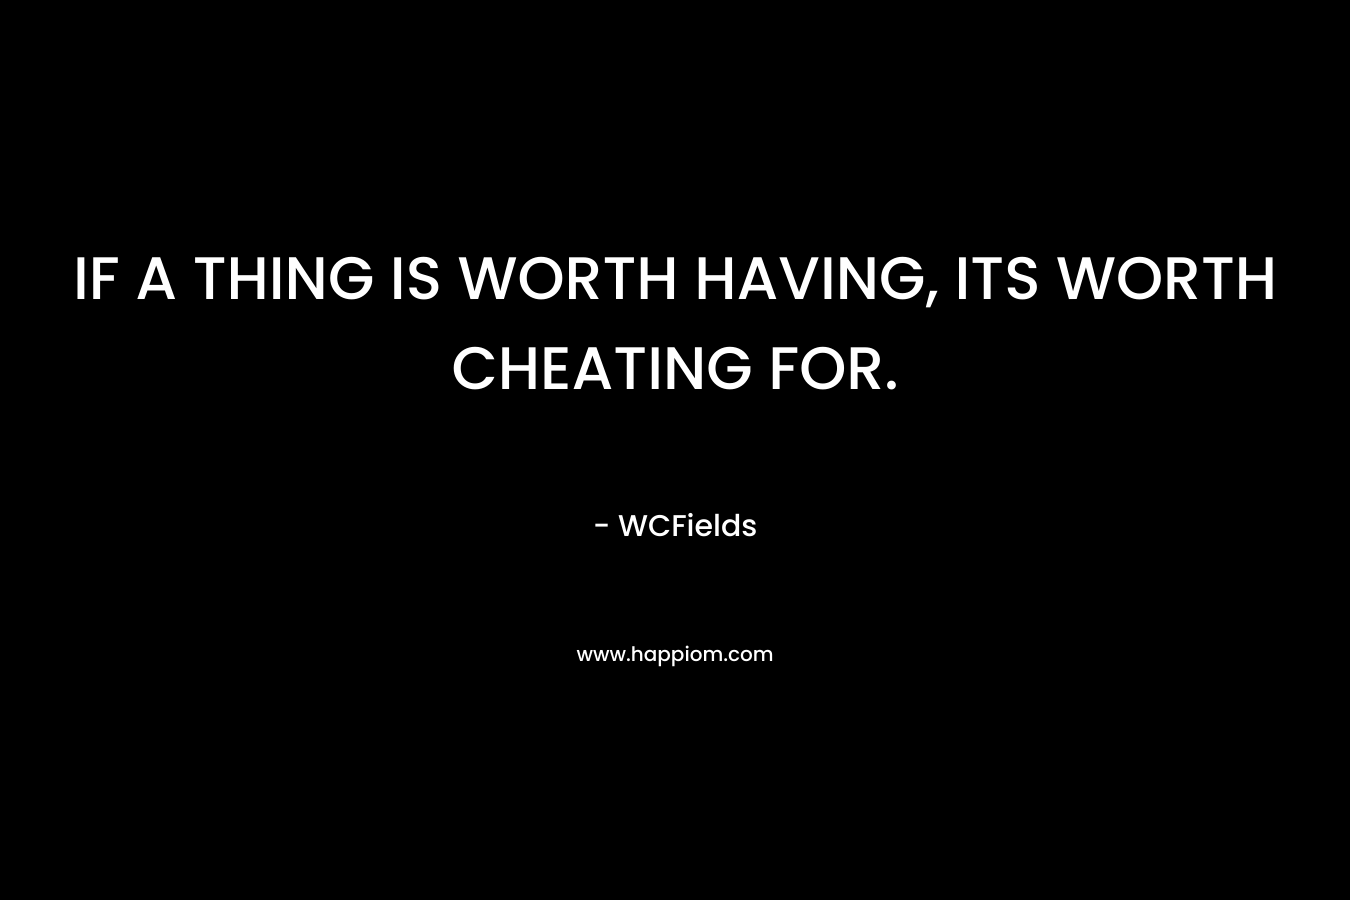 IF A THING IS WORTH HAVING, ITS WORTH CHEATING FOR. – WCFields